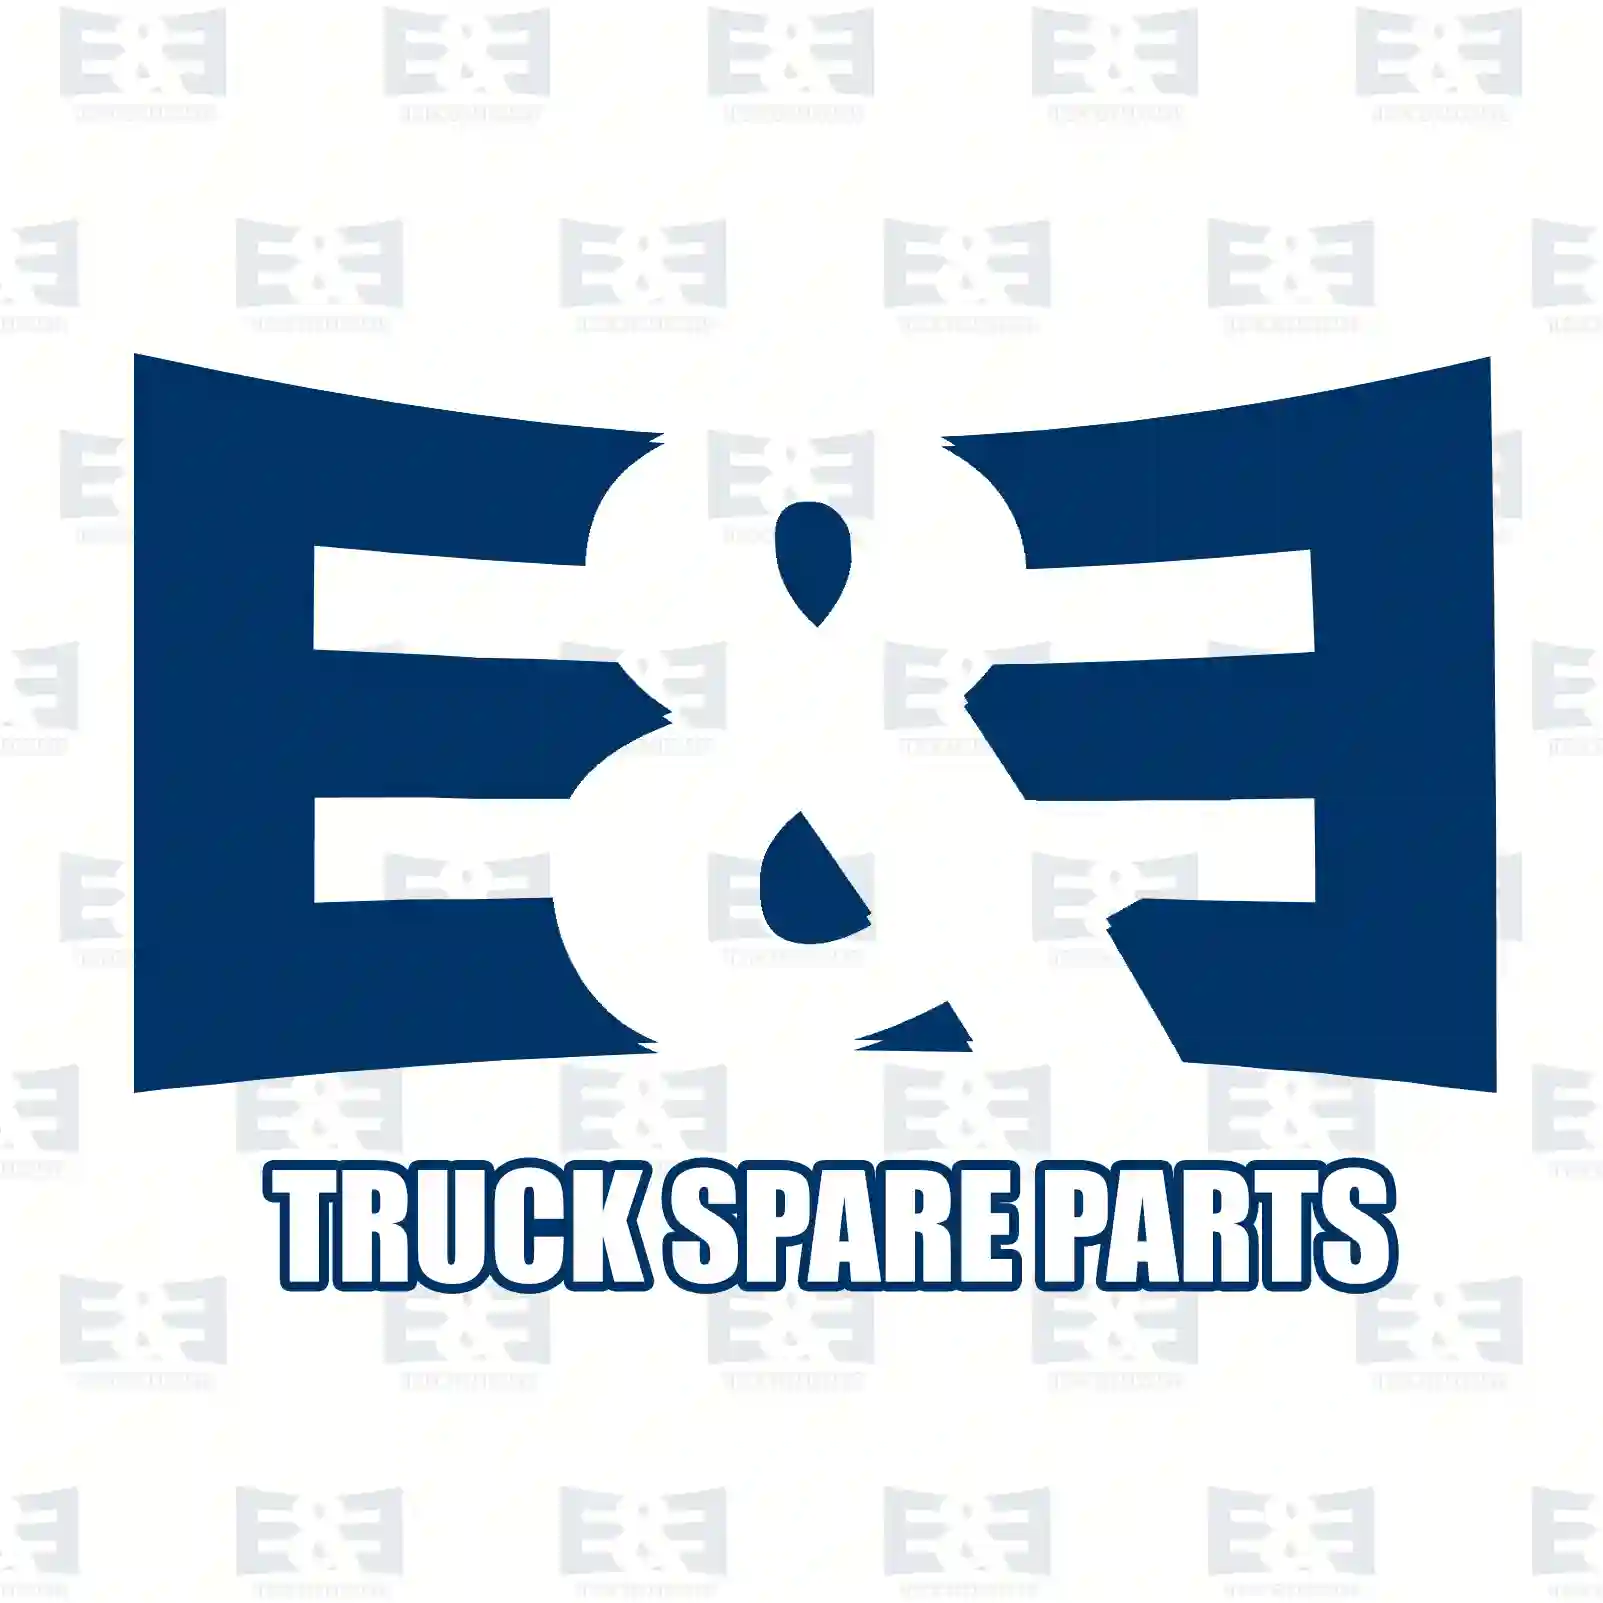  Adjusting ring || E&E Truck Spare Parts | Truck Spare Parts, Auotomotive Spare Parts